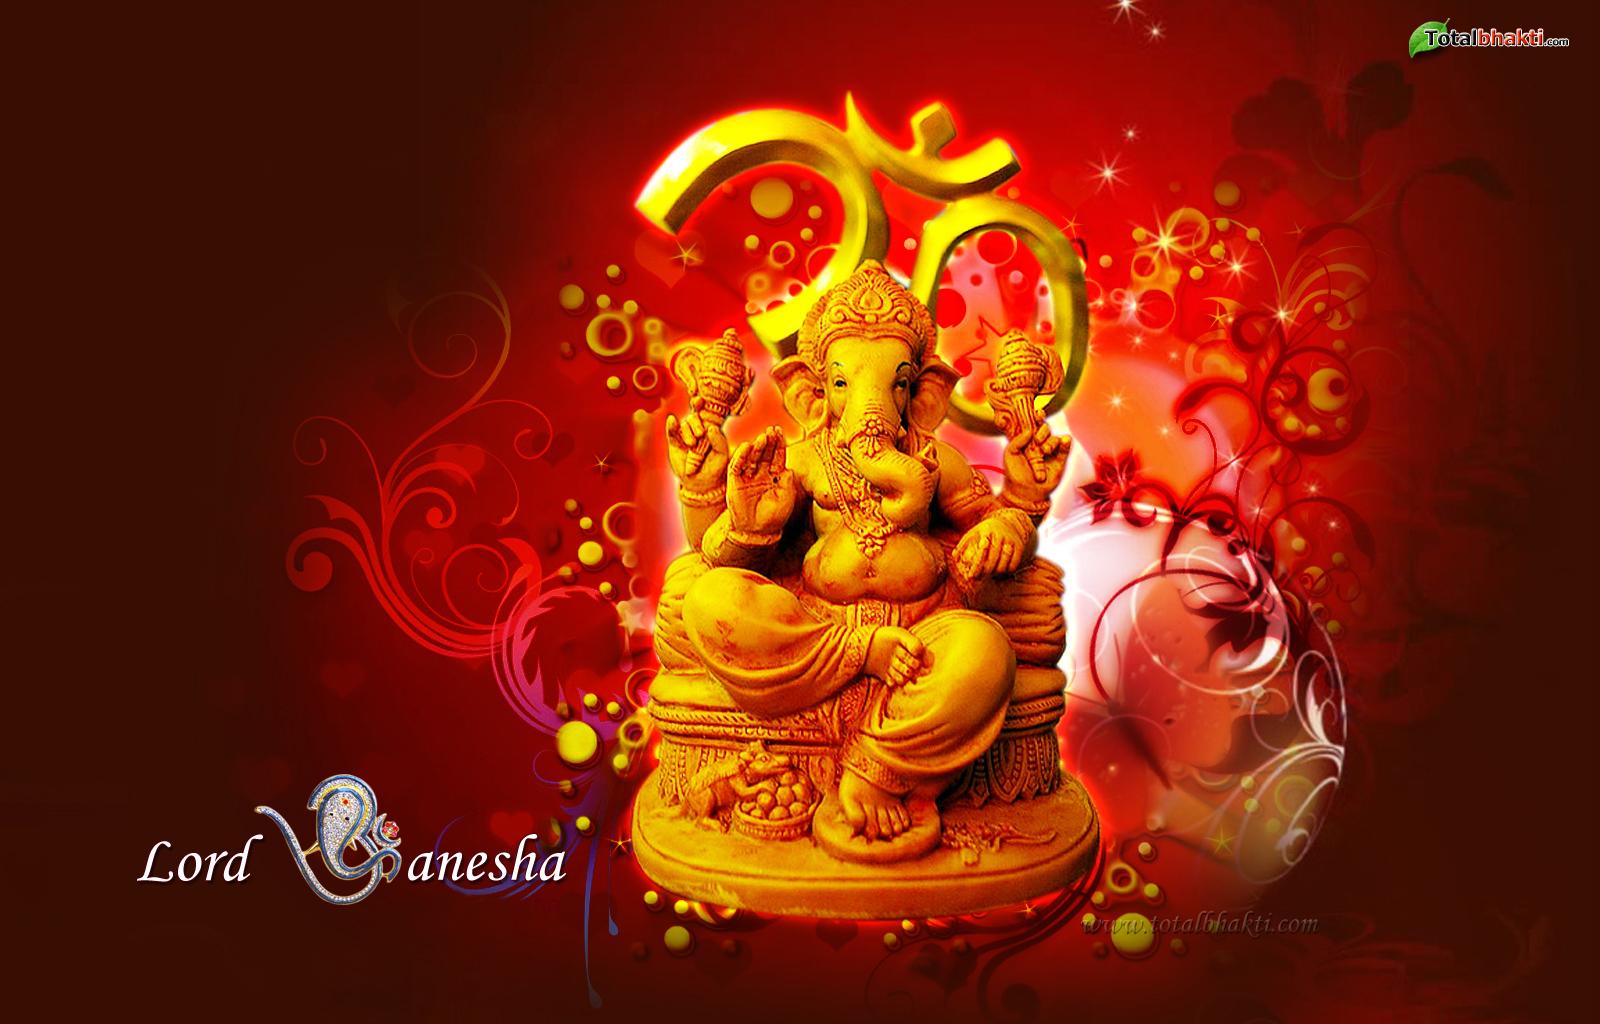 Lord Ganesha Wallpapers For Windows 8